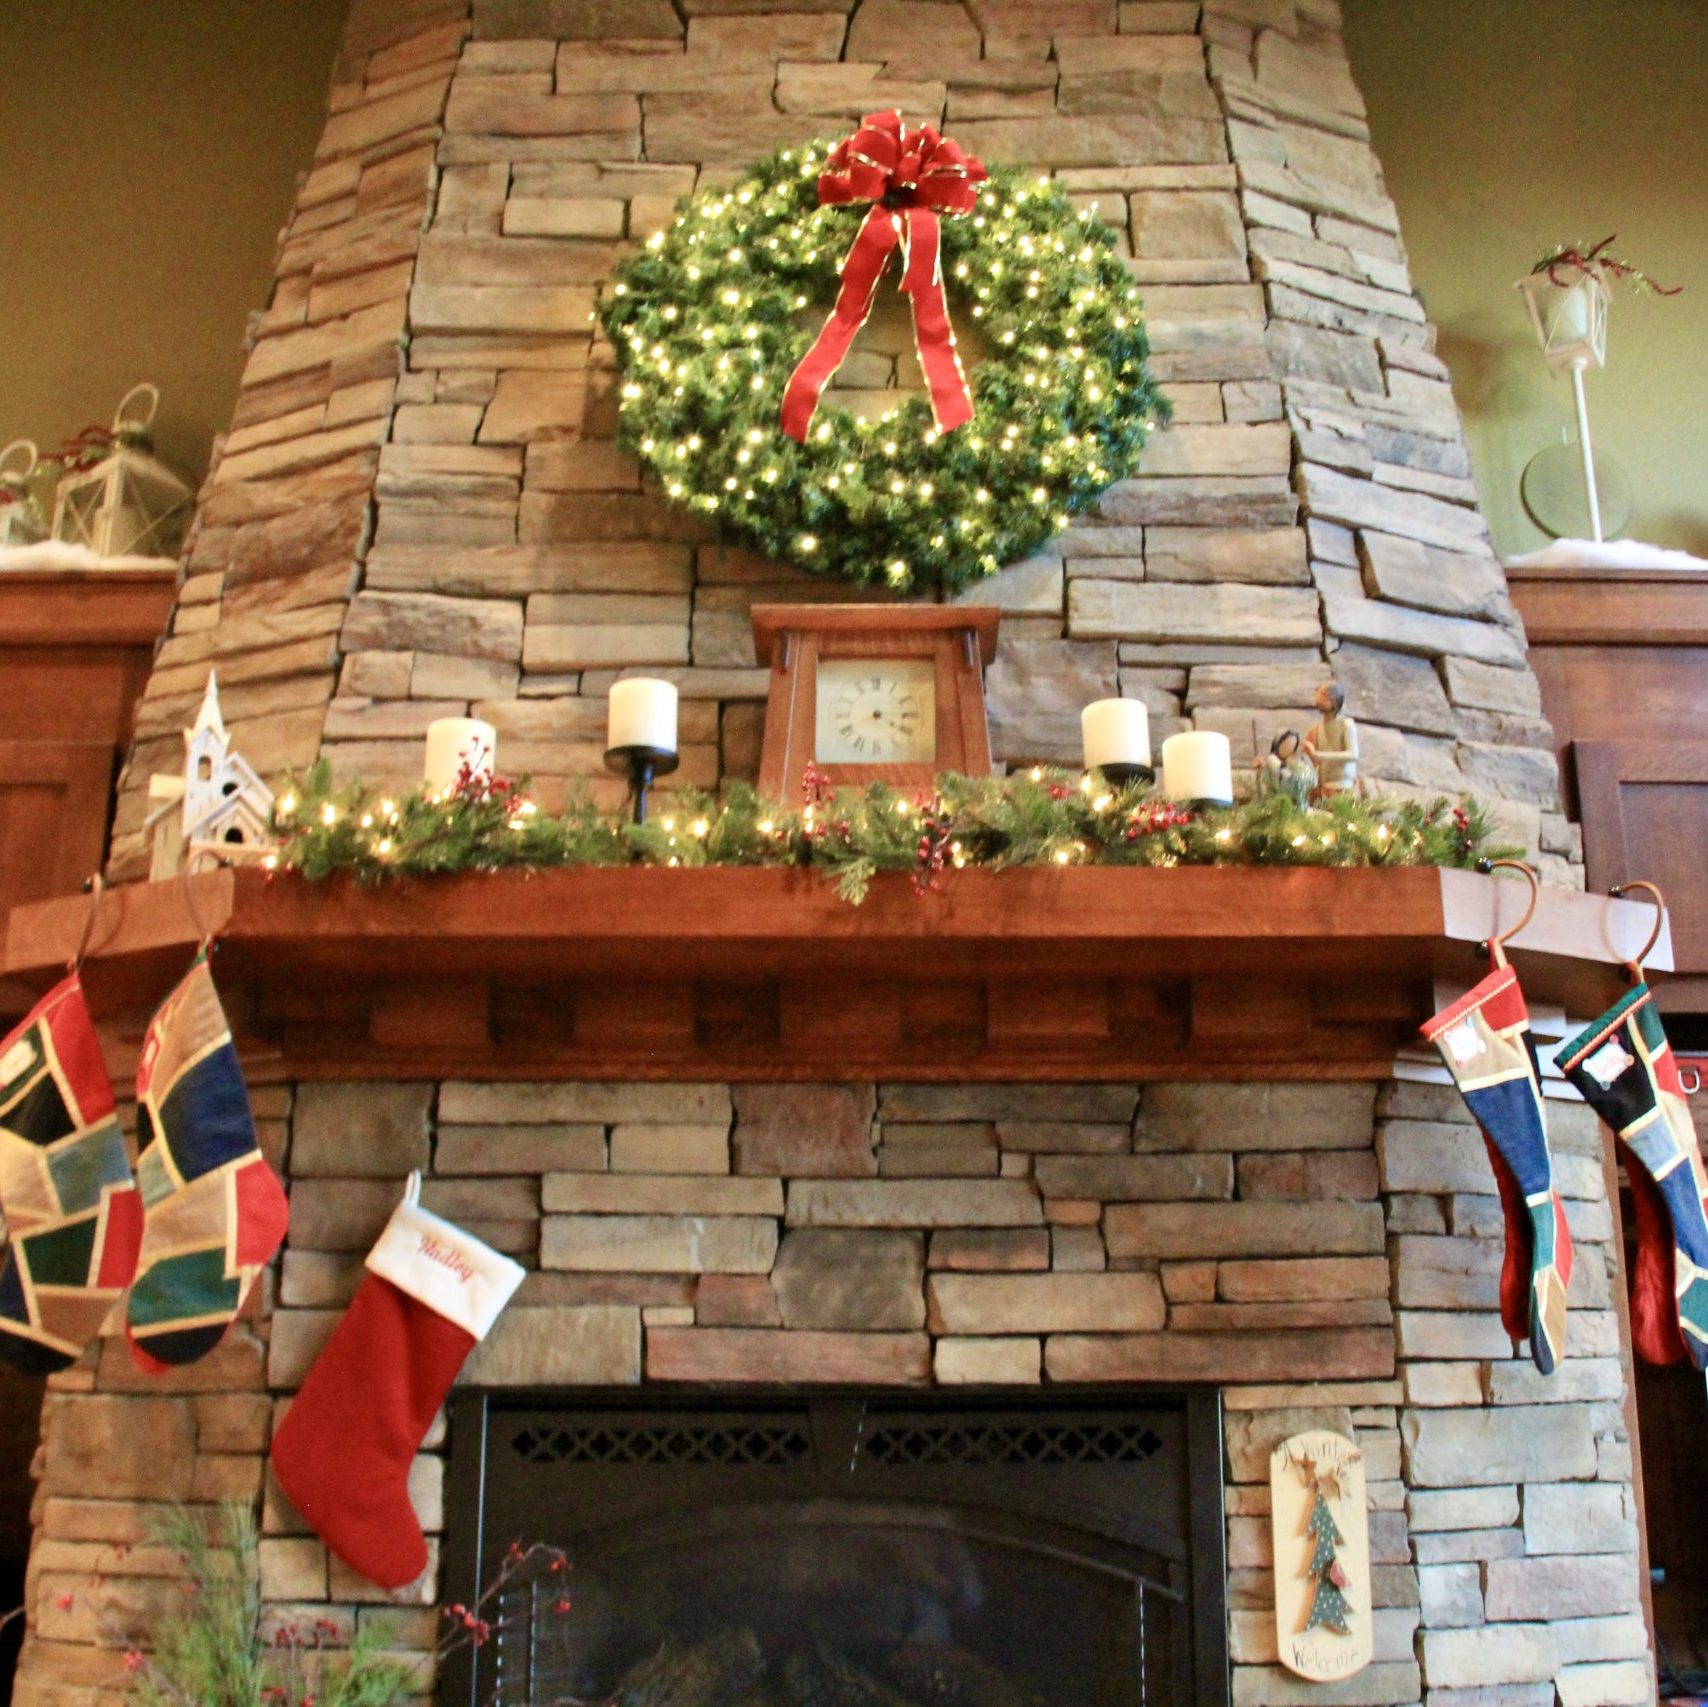 The fireplace is the focal point in the room and at Christmas its beautiful.